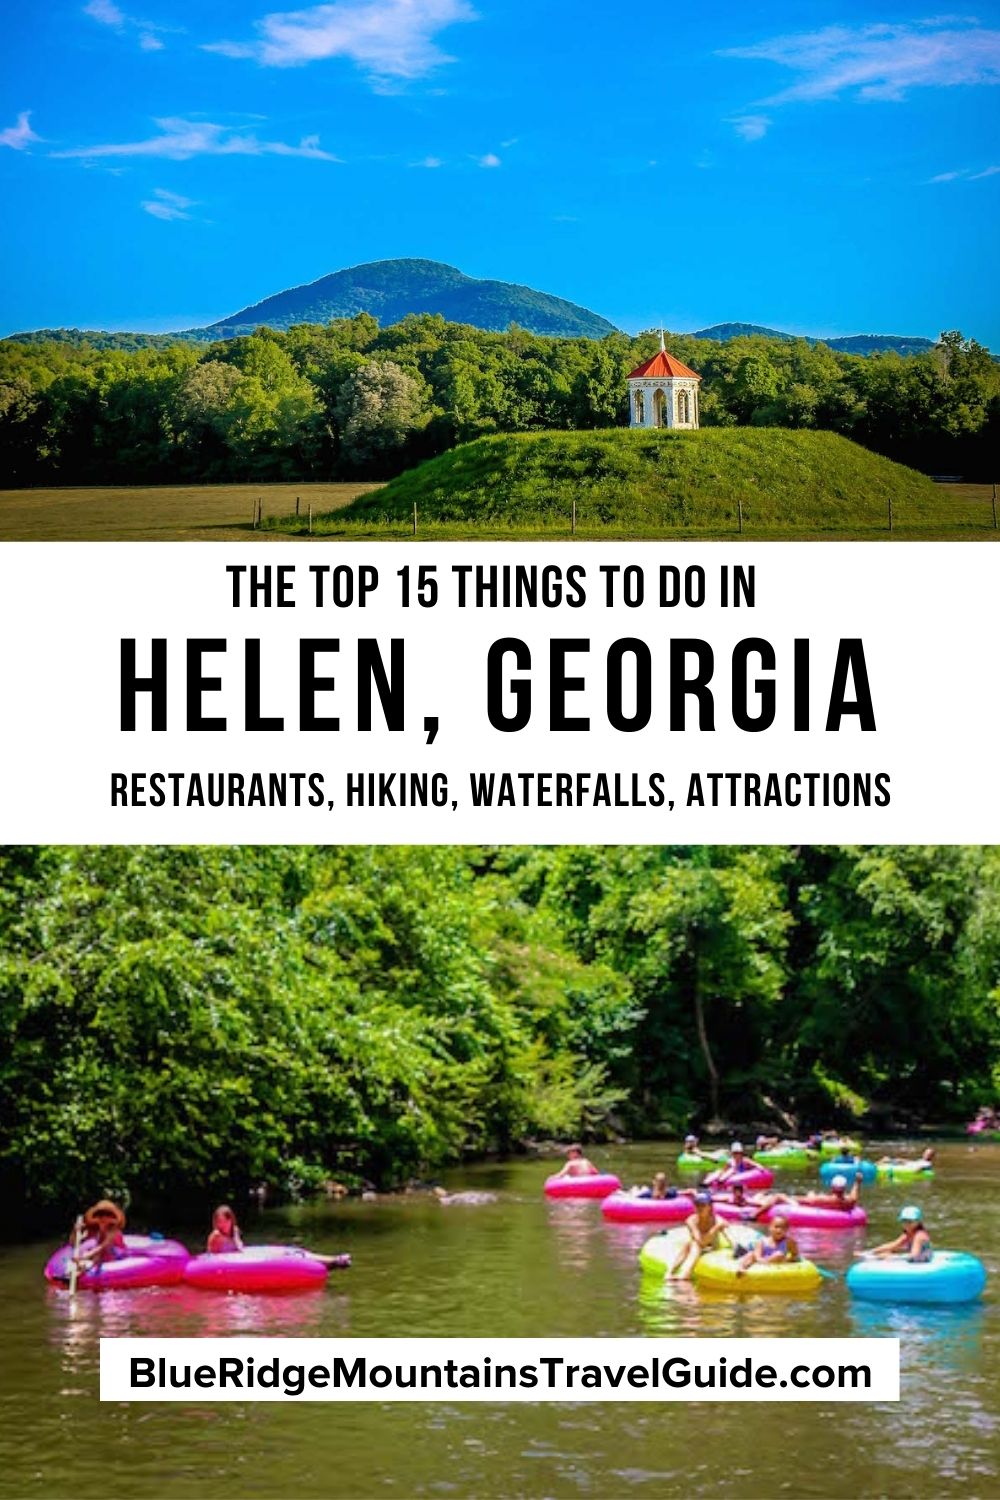 The 15 Best Things to Do in Helen GA including all the best Helen restaurants, hiking trails, waterfalls, and other popular tourist attractions | helen ga things to do | helen ga attractions | things to do near helen ga | helen ga activities | things to do around helen ga | things to do in helen georgia | helen georgia things to do | helen ga downtown | what to do in helen georgia | what to do in helen ga | helen ga attractions | attractions helen georgia